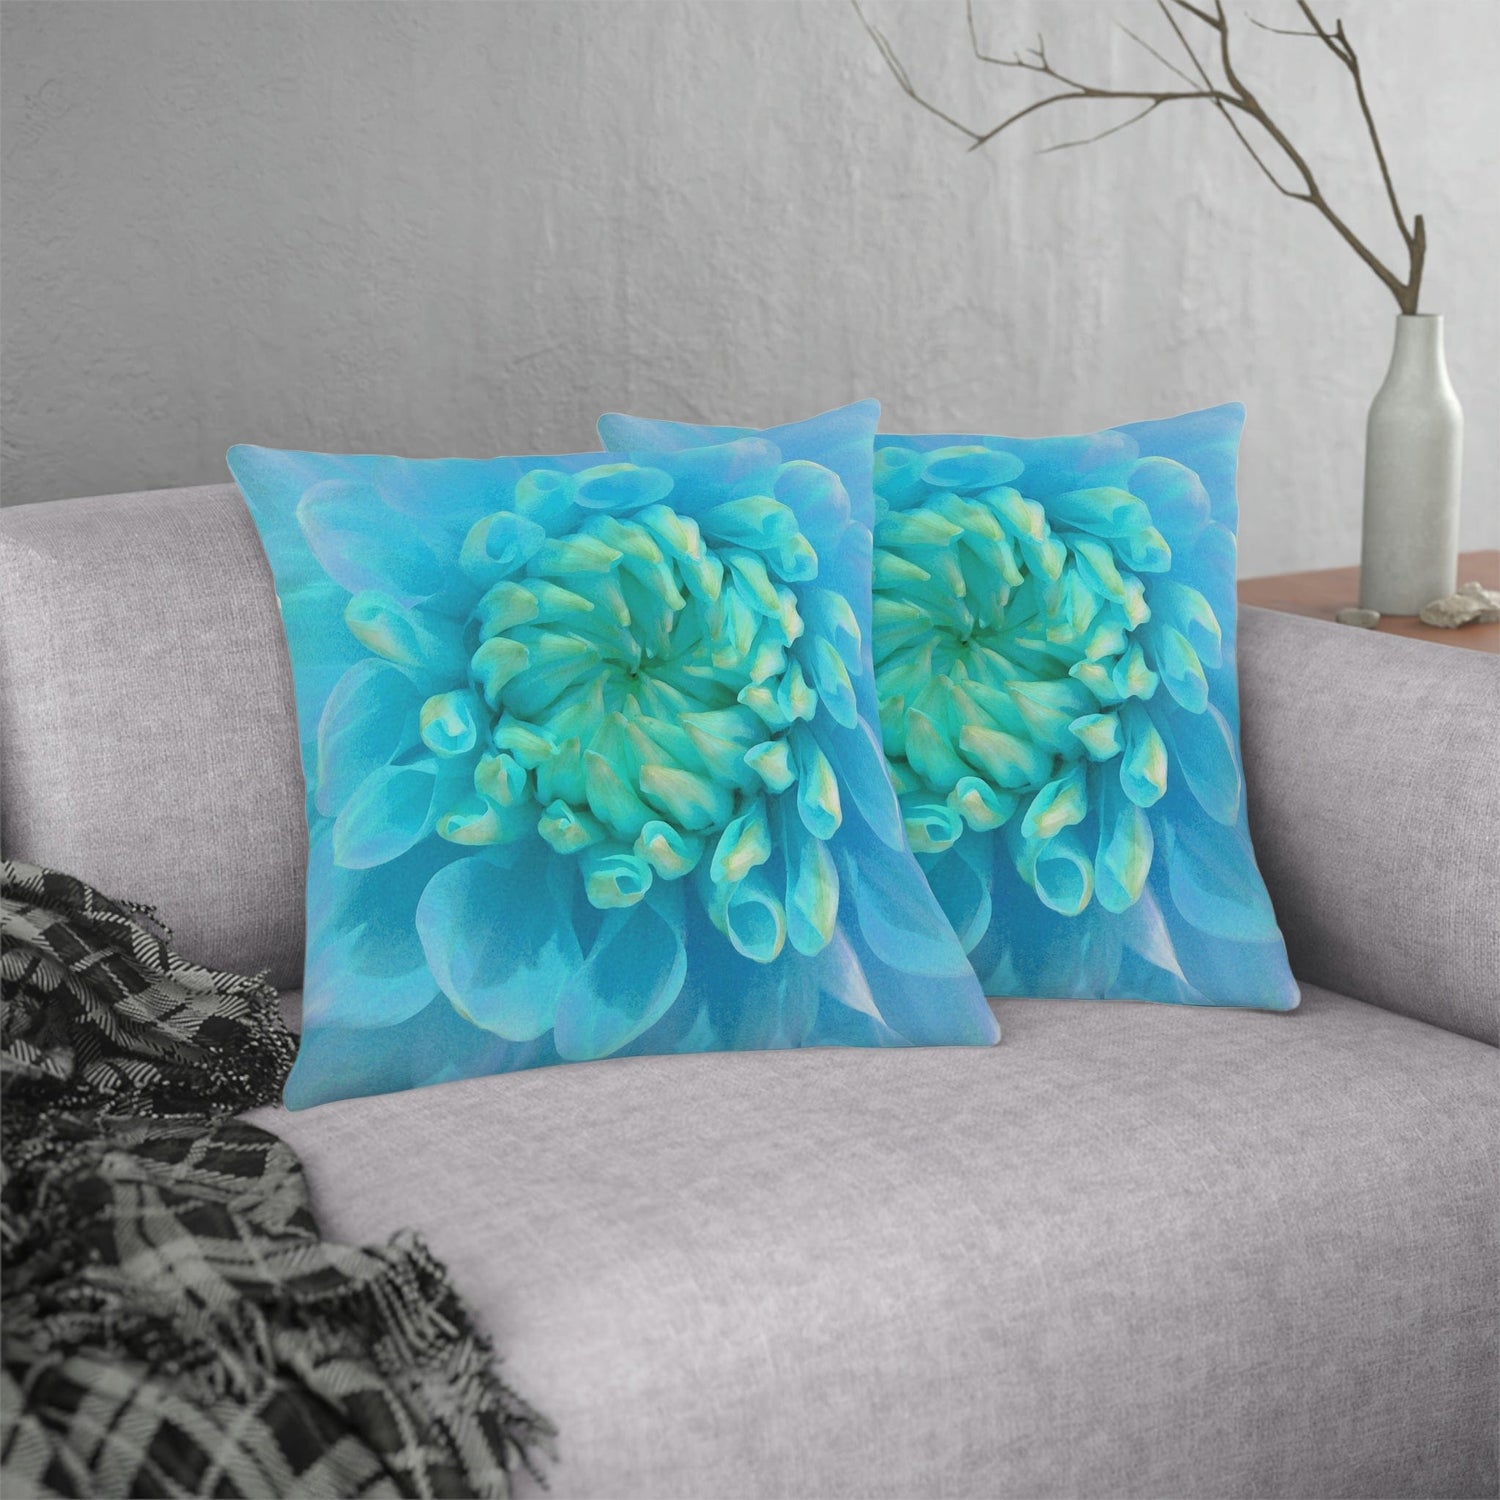 Kate McEnroe New York Outdoor Pillow in Painted Turquoise Dahlia FlowerThrow Pillows15064022590620034333